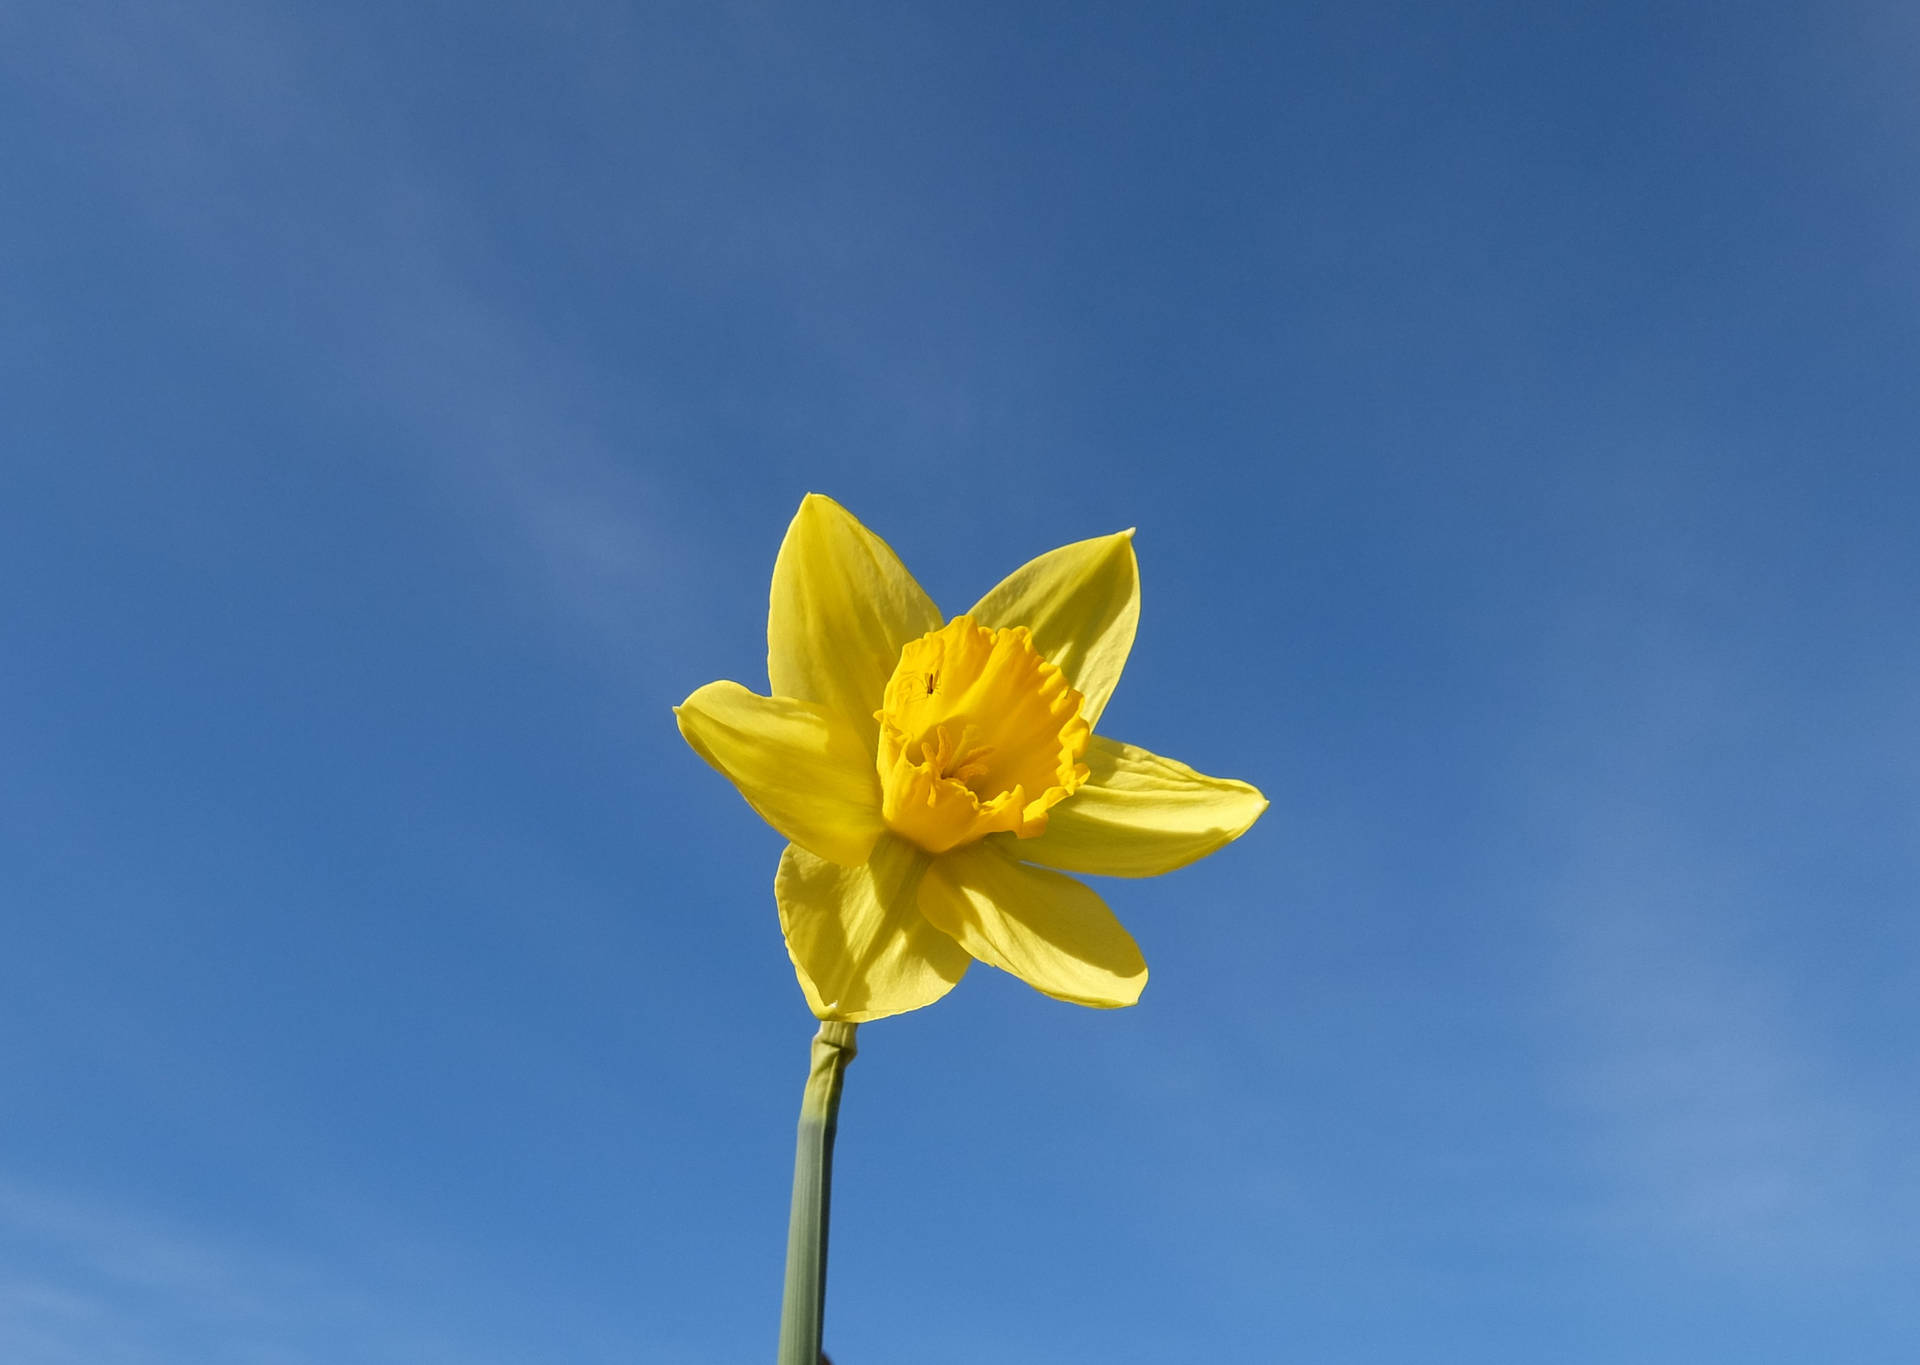 Daffodil 3260X2317 Wallpaper and Background Image